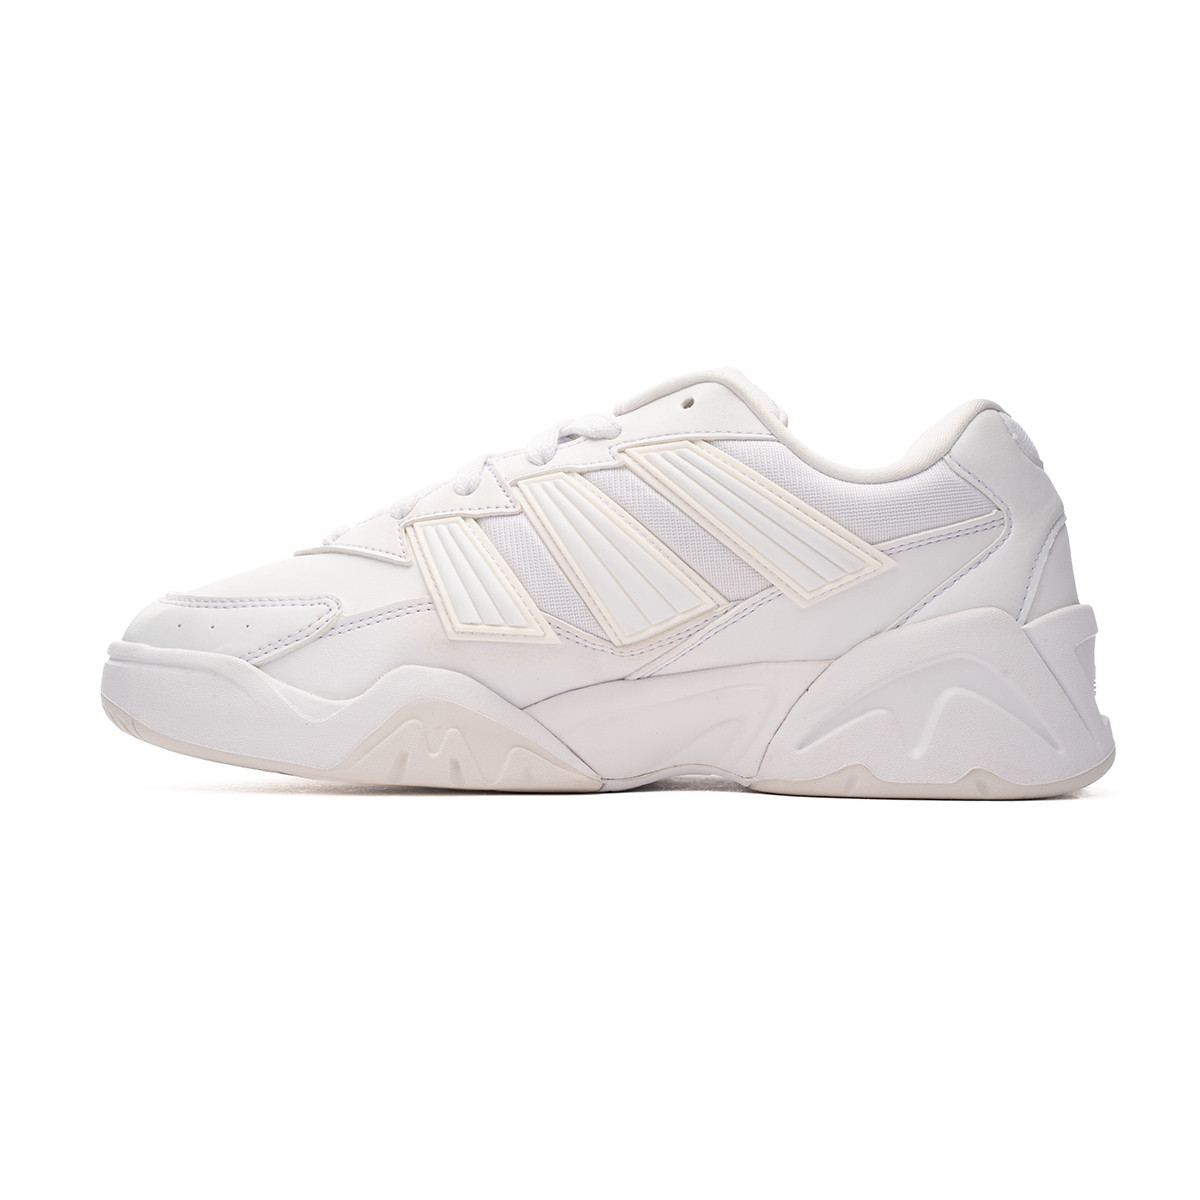 Fútbol - White White-White-Crystal Magnetic Trainers Emotion adidas Court